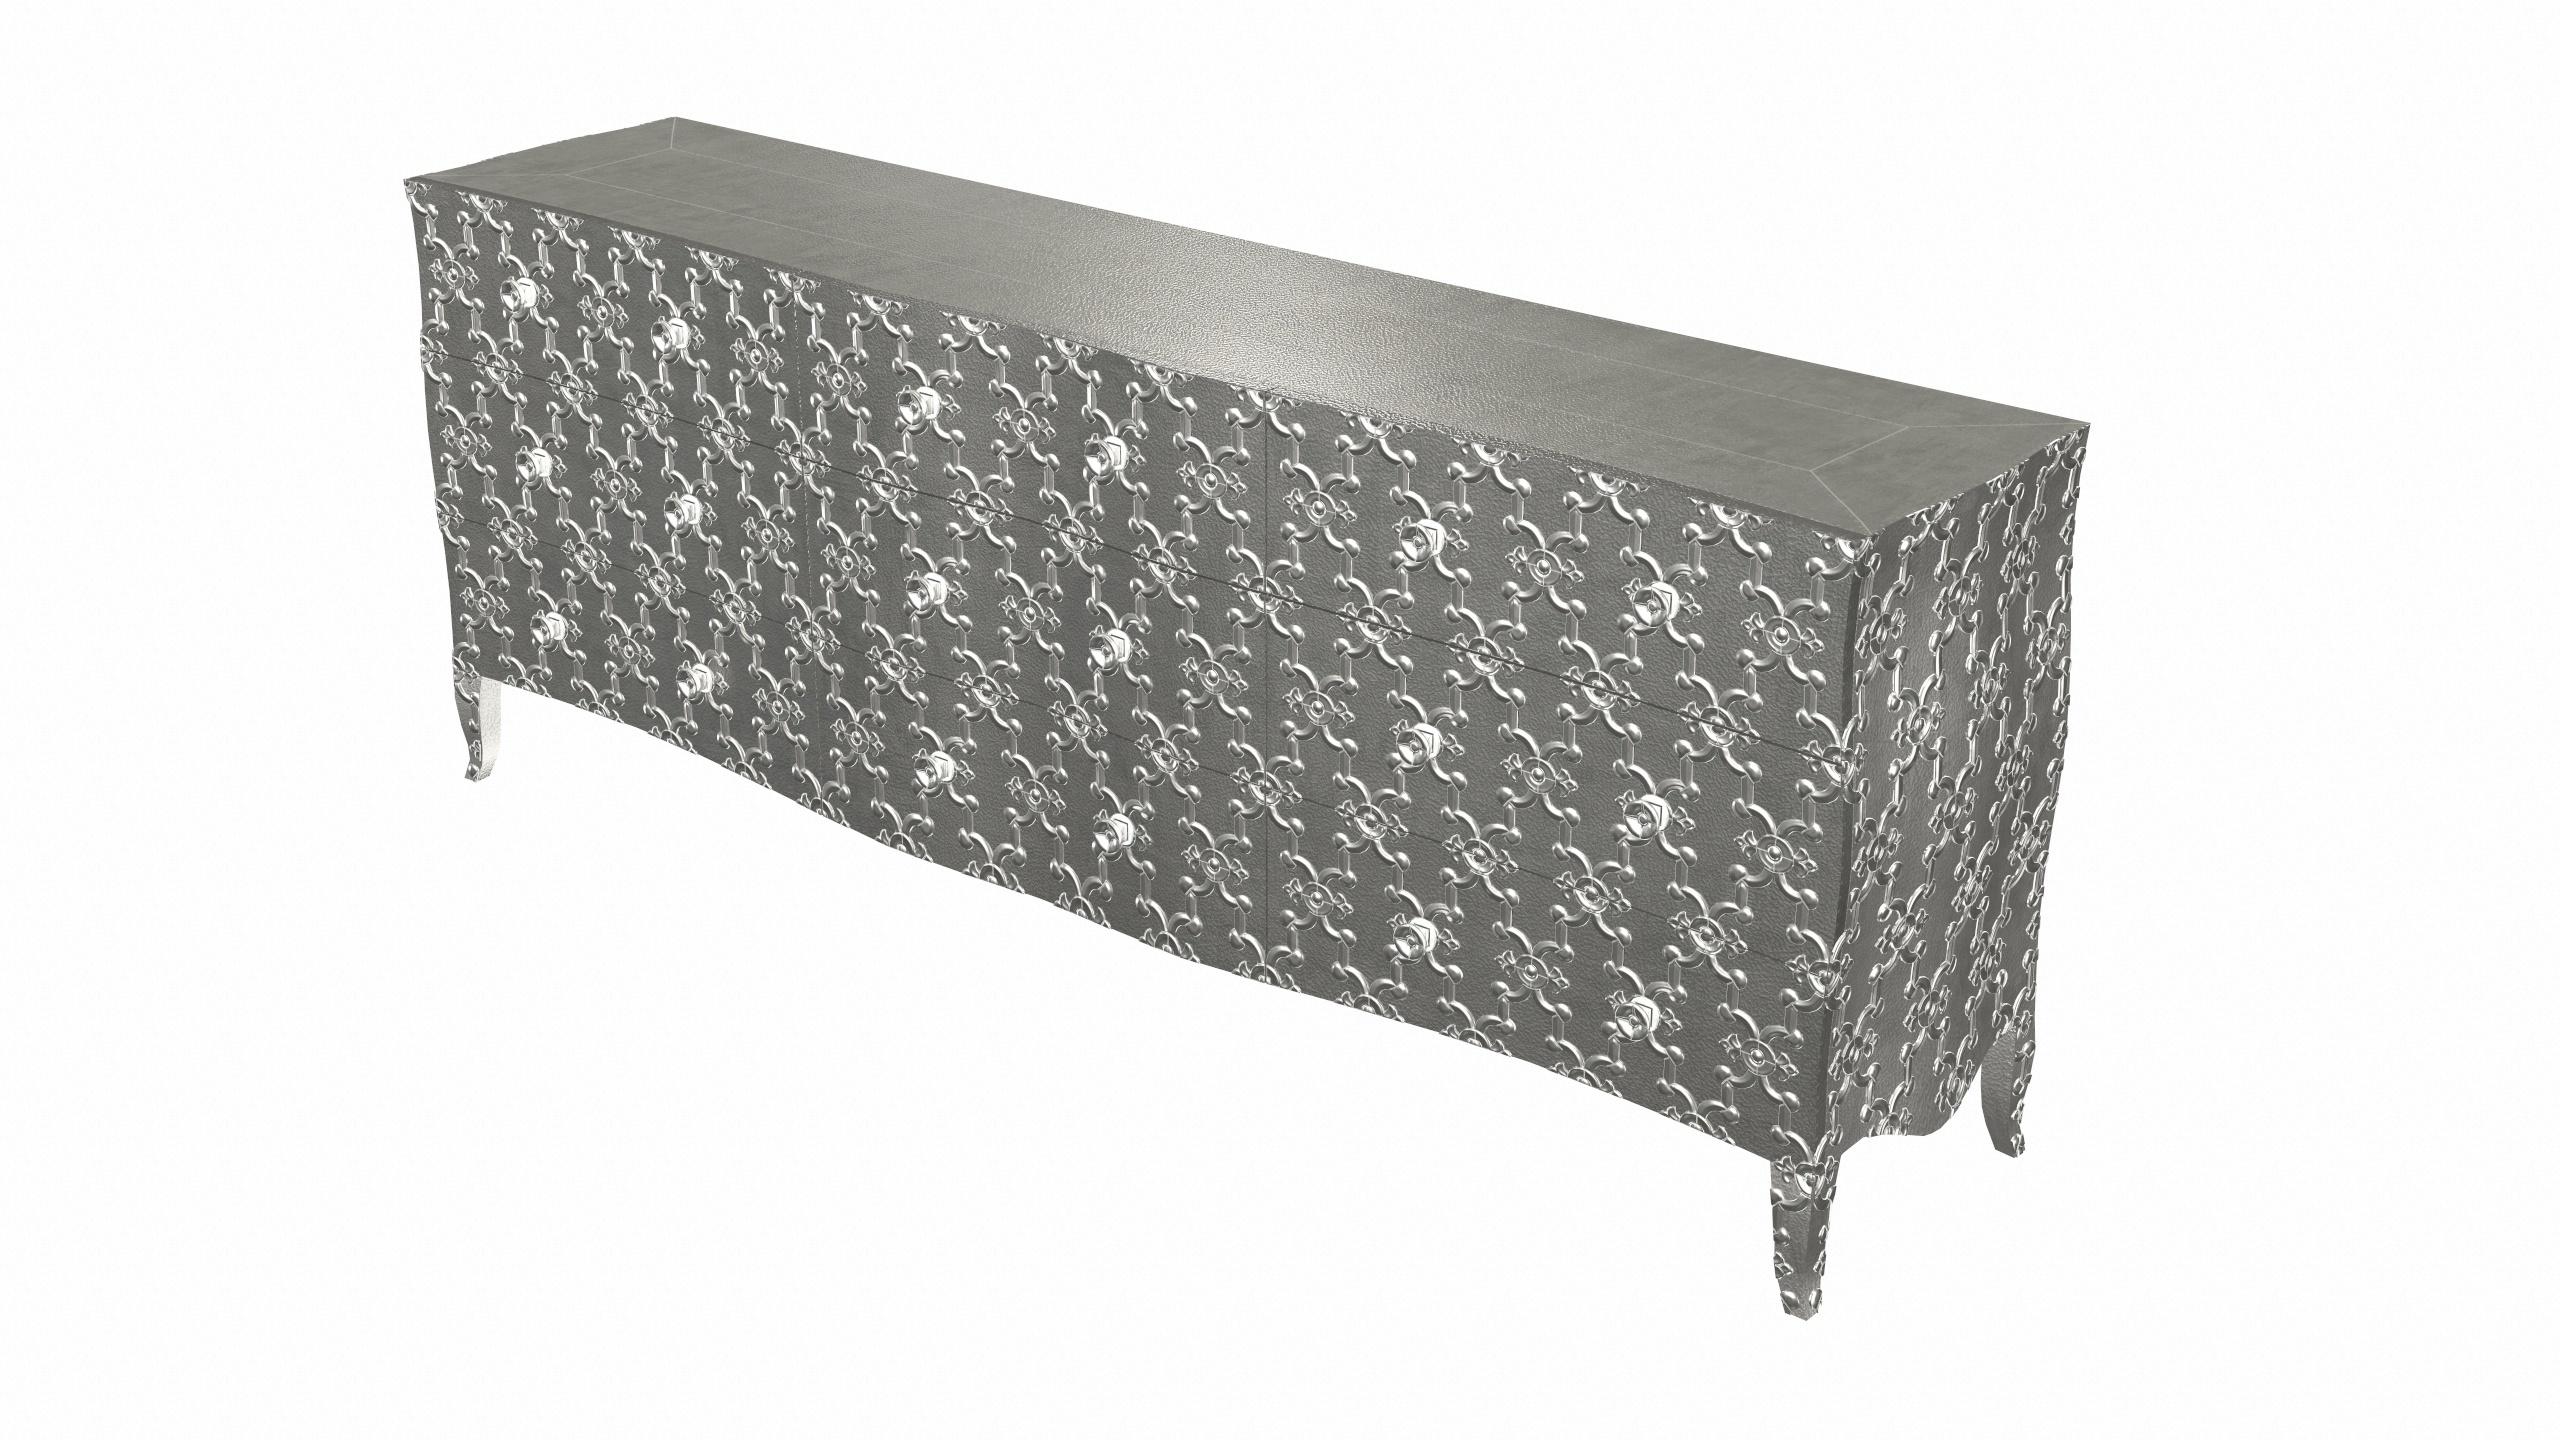 Renowned designer Paul Mathieu created this large dresser with 9 drawers with his interpretation of Fleur de Lis motif carved all over the piece just like the other two designs namely the Louise Semainier and Demi Louise Semainier which are part of